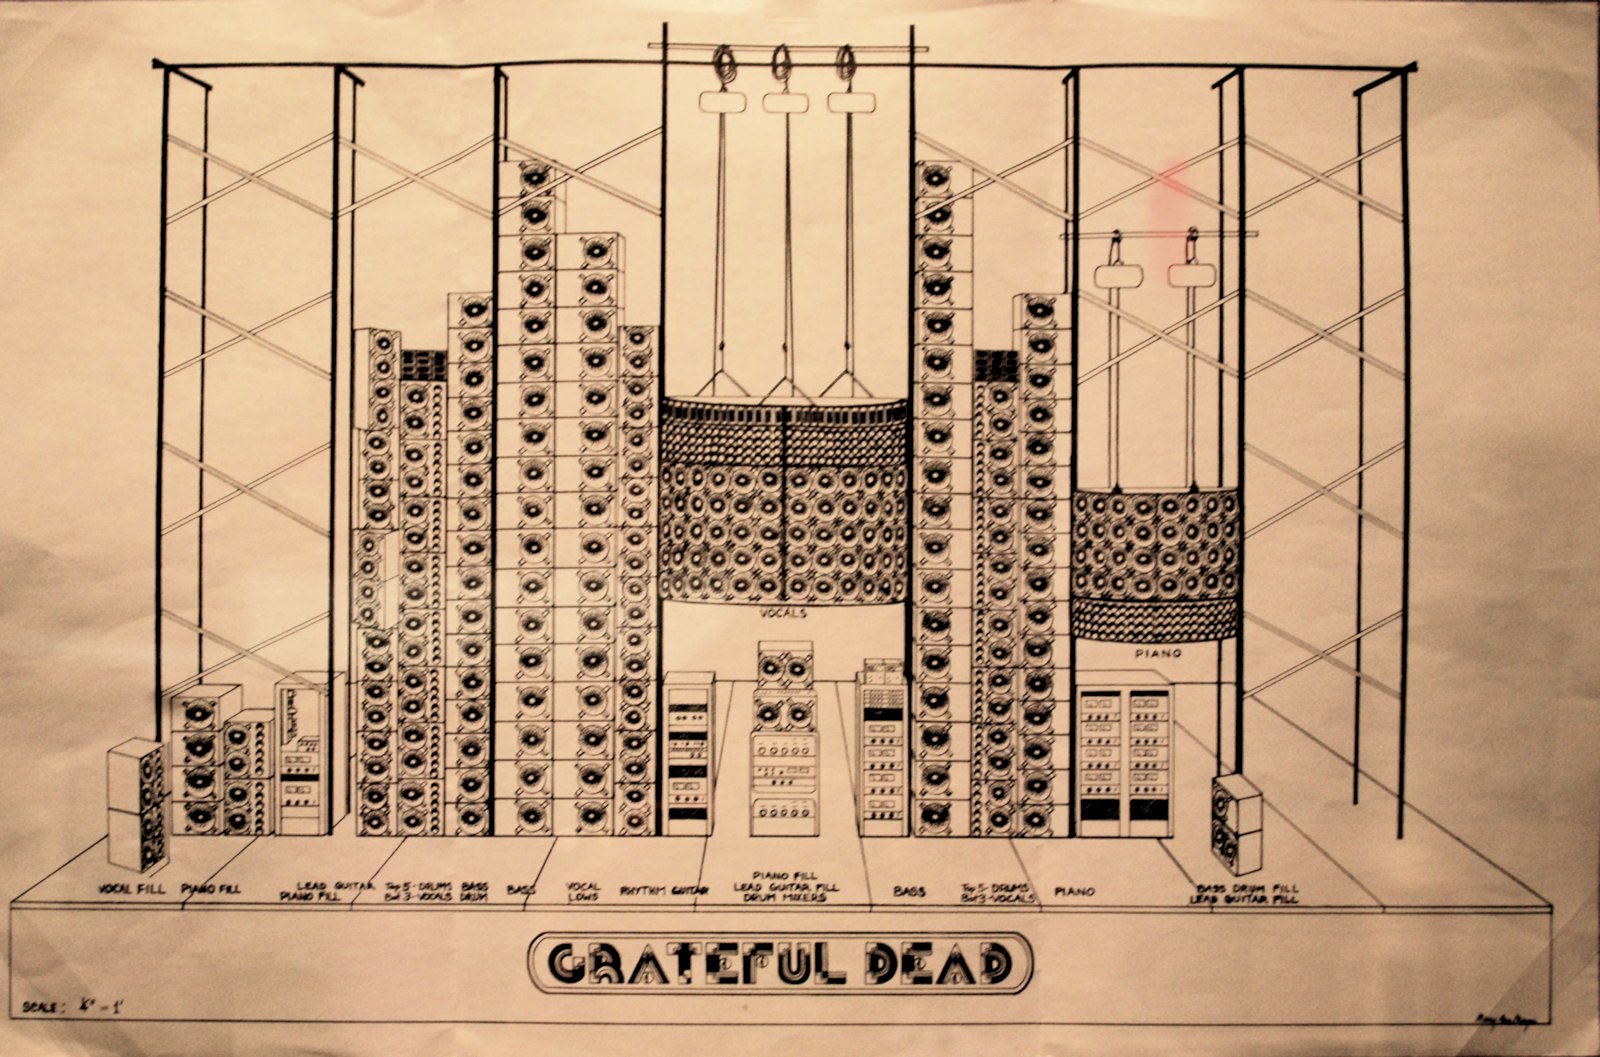 All This Is That: The Grateful Dead's amazing Wall of Sound system, ca